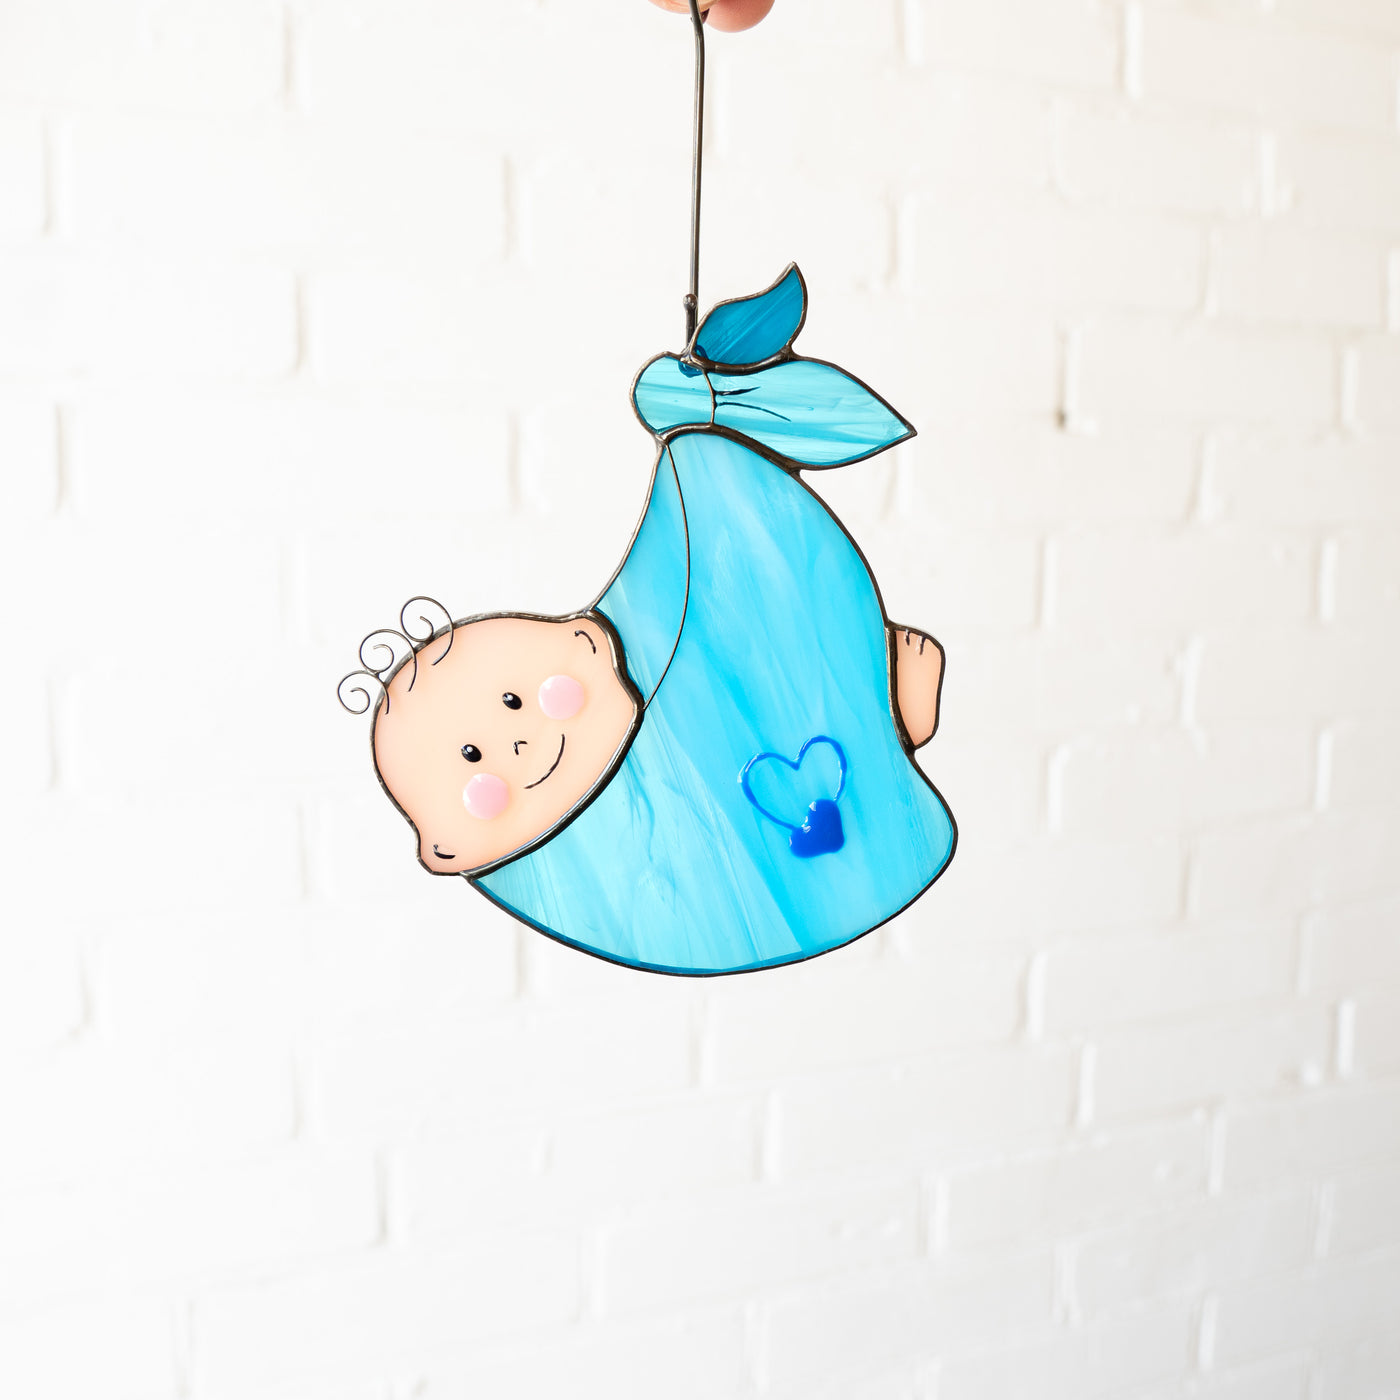 Stained glass suncatcher of a baby boy 